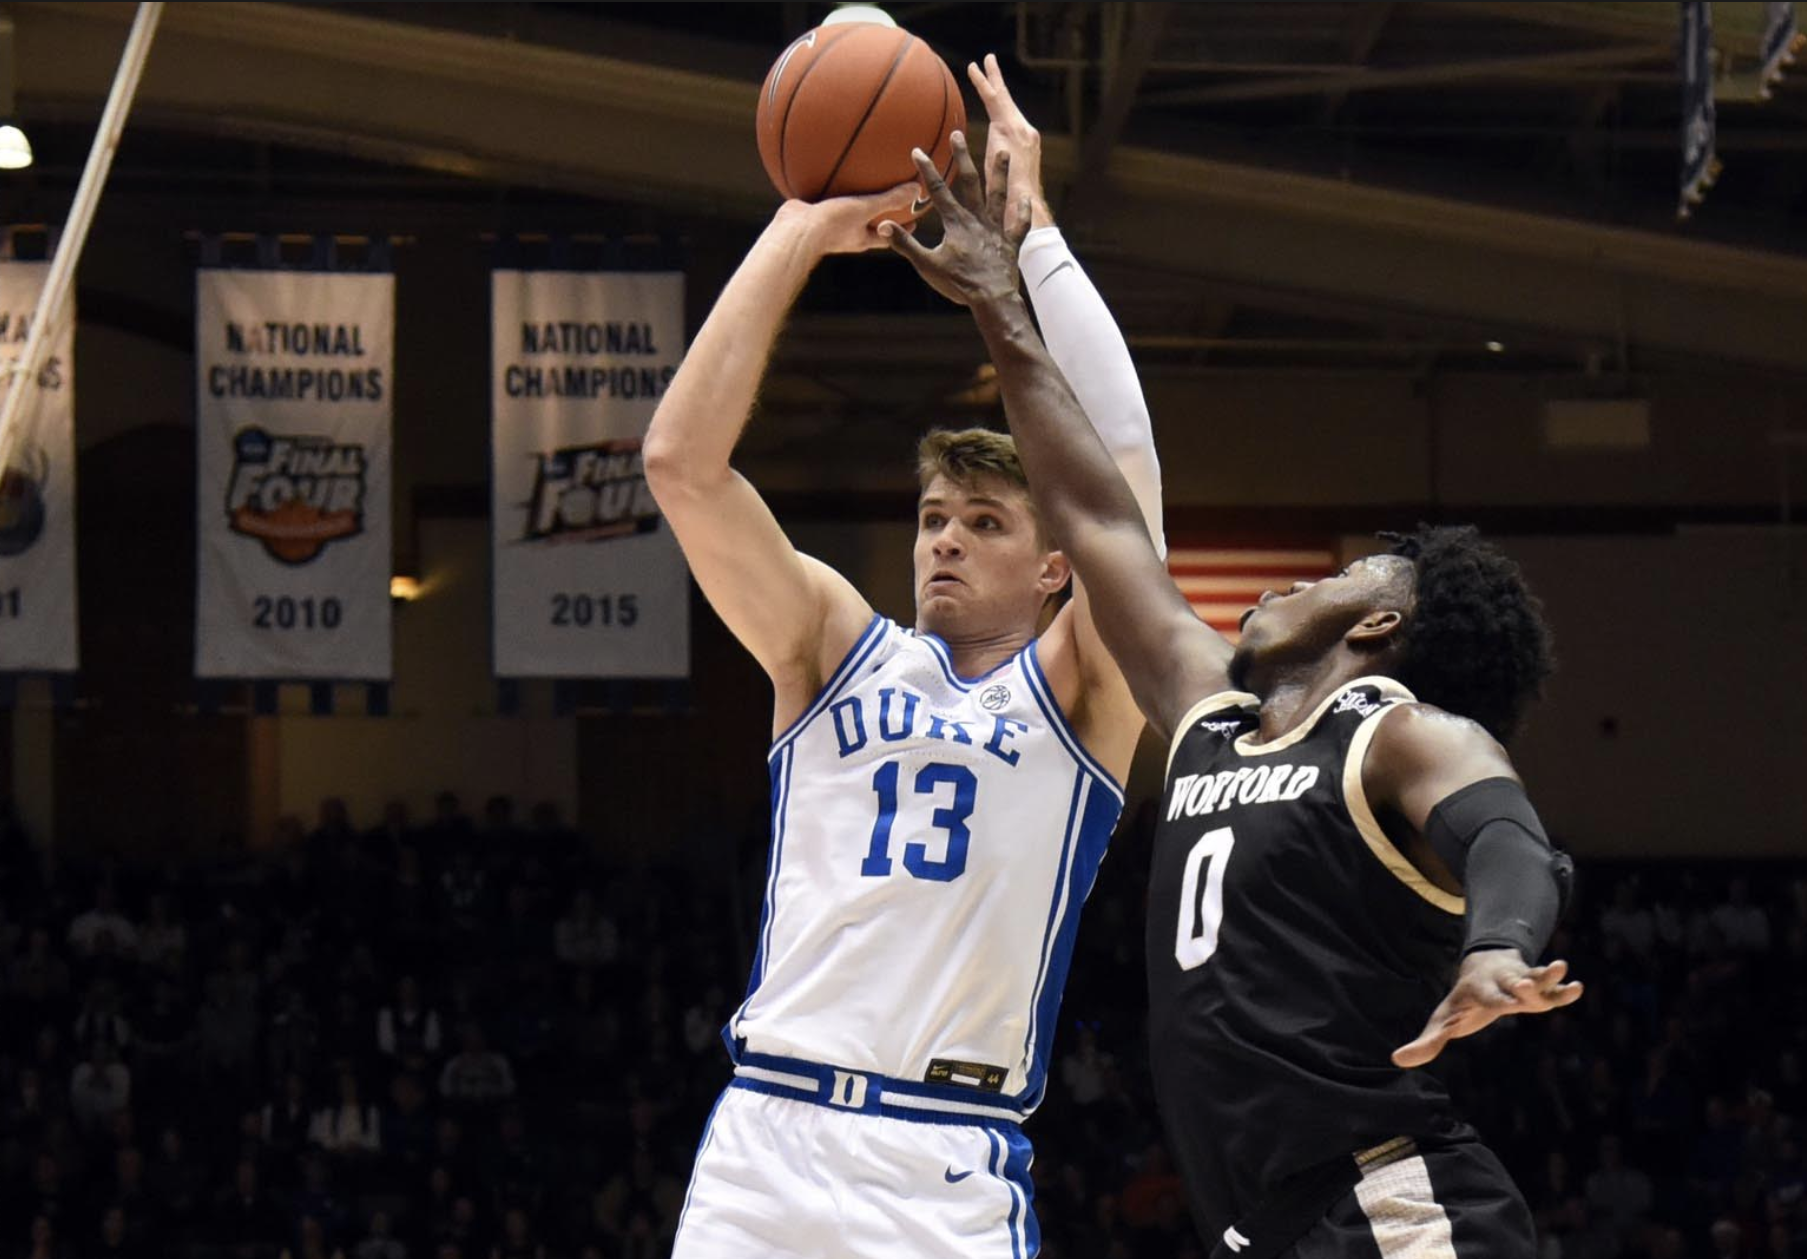 Duke Quotes & Notes from the 75 – 50 Victory over Brown